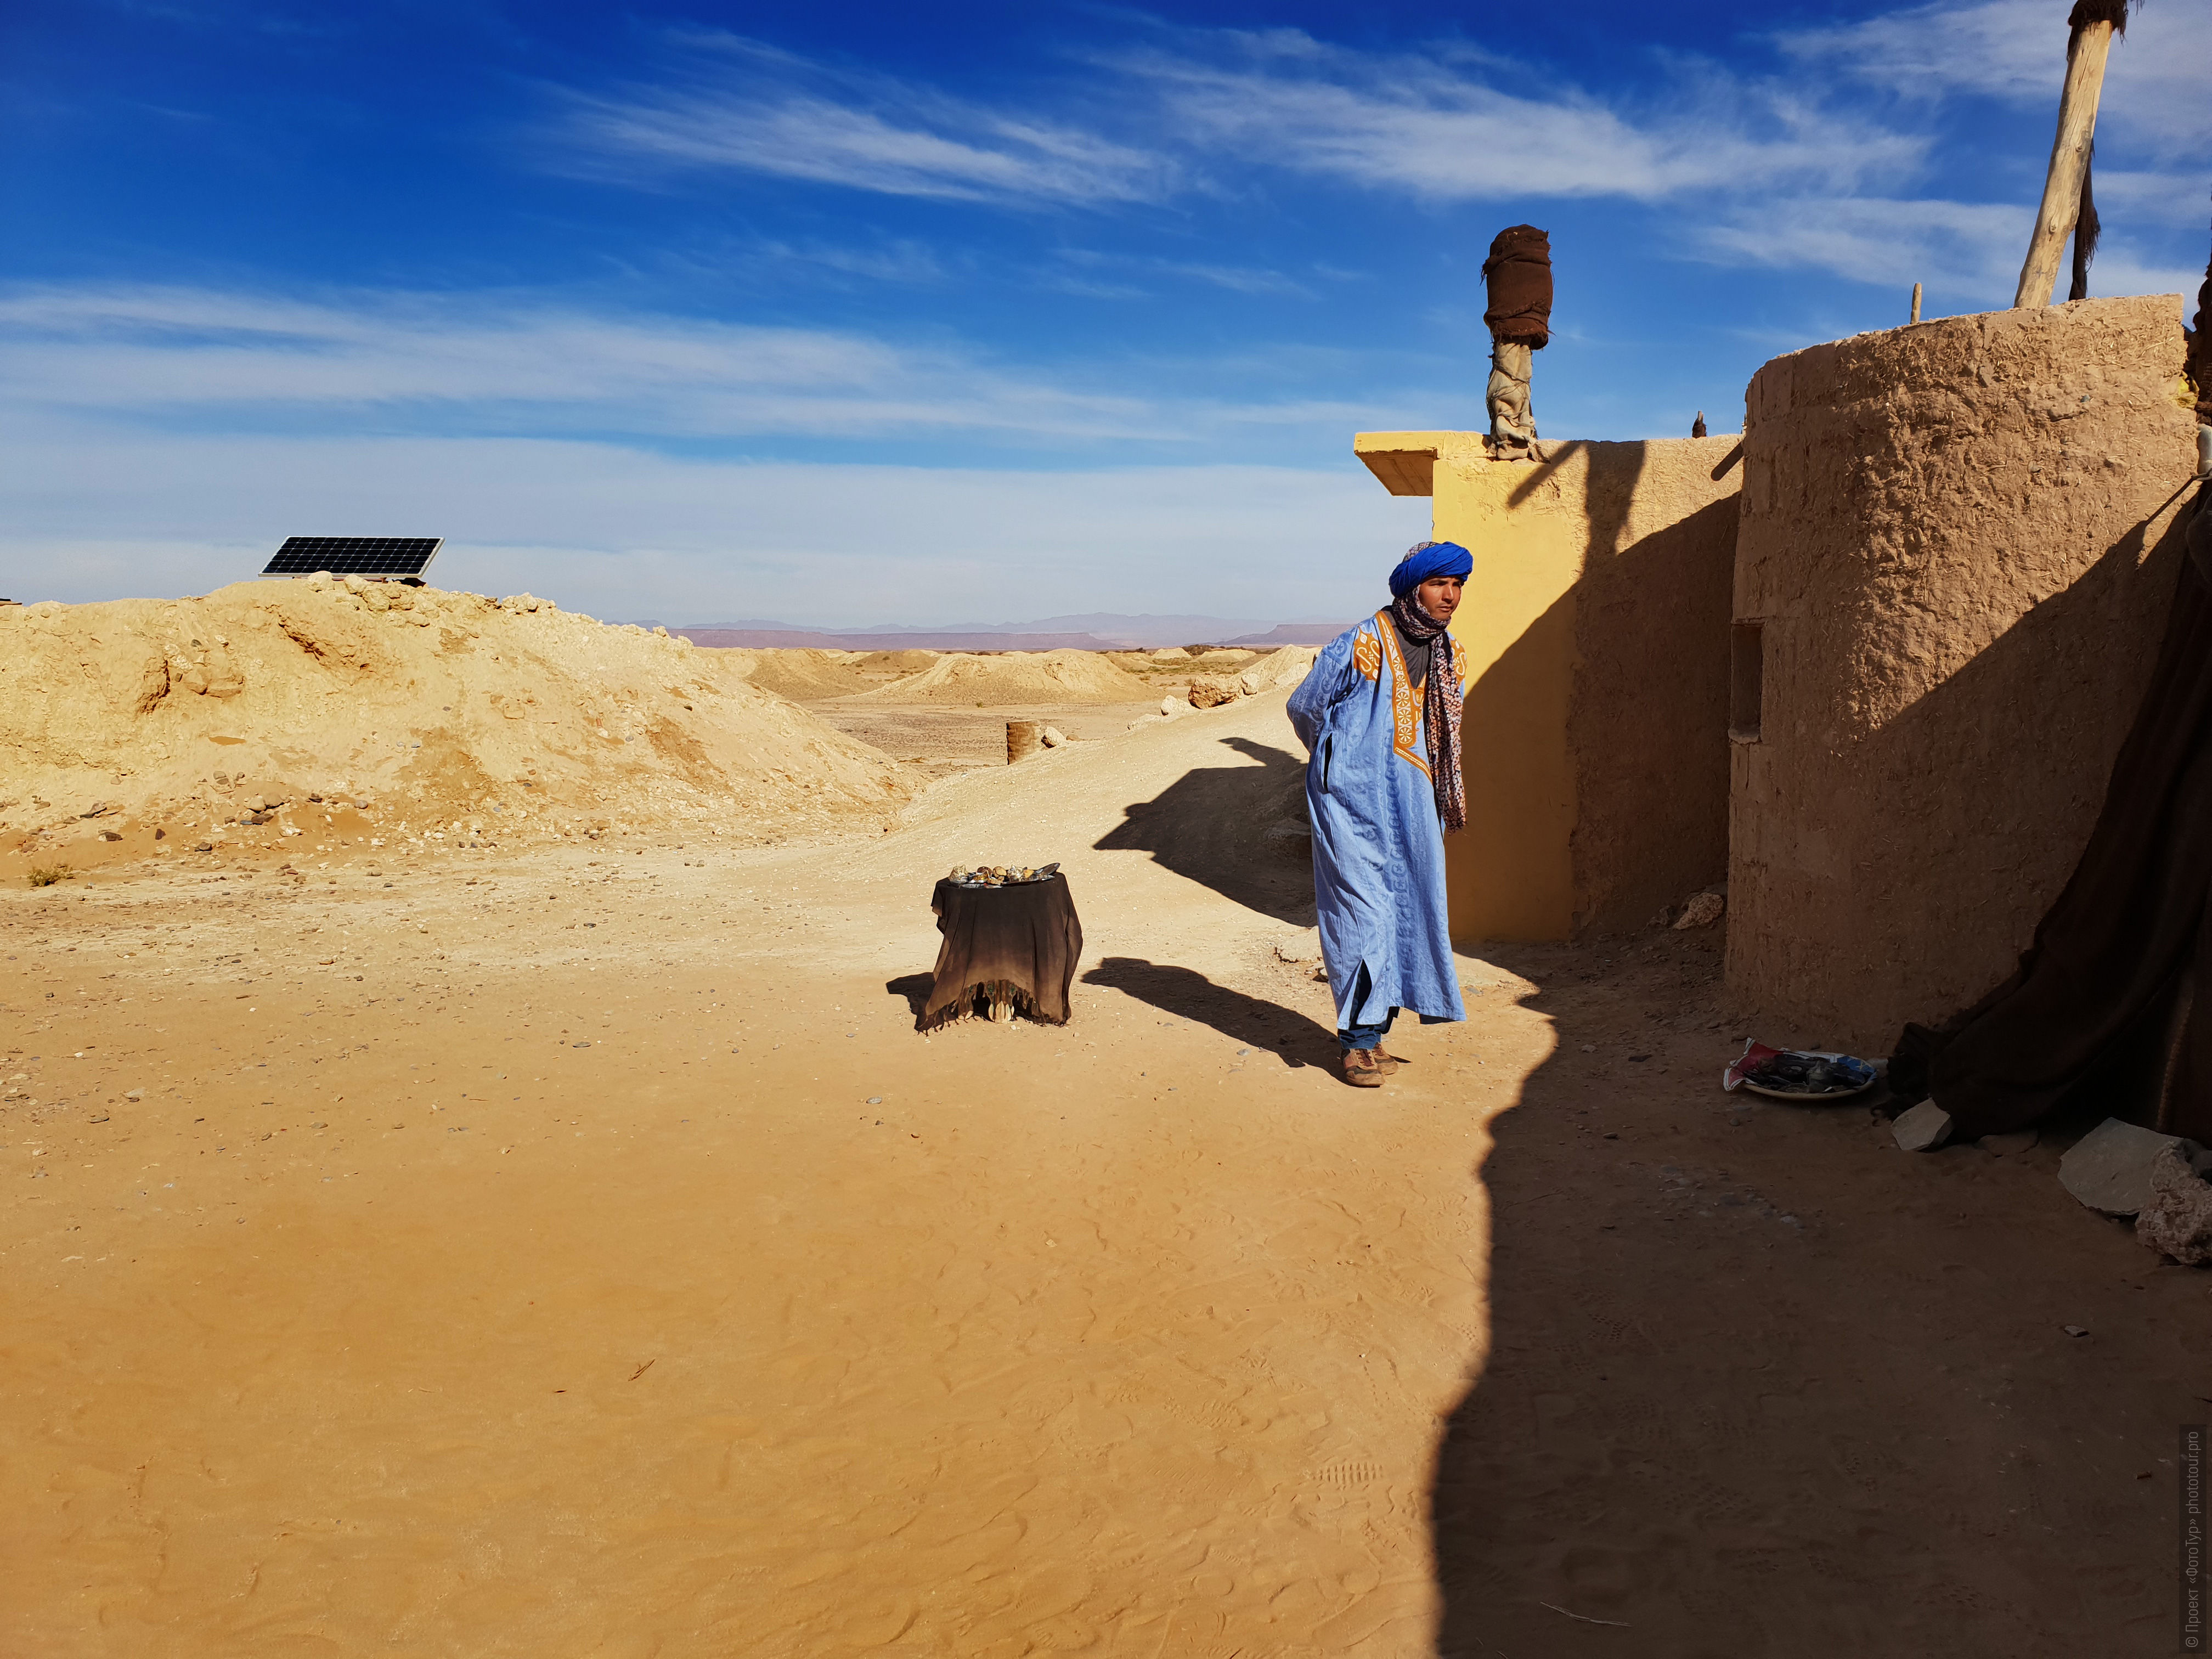 Berber in national dress, resident of Merzouga. Adventure photo tour: medina, cascades, sands and ports of Morocco, April 4 - 17, 2020.